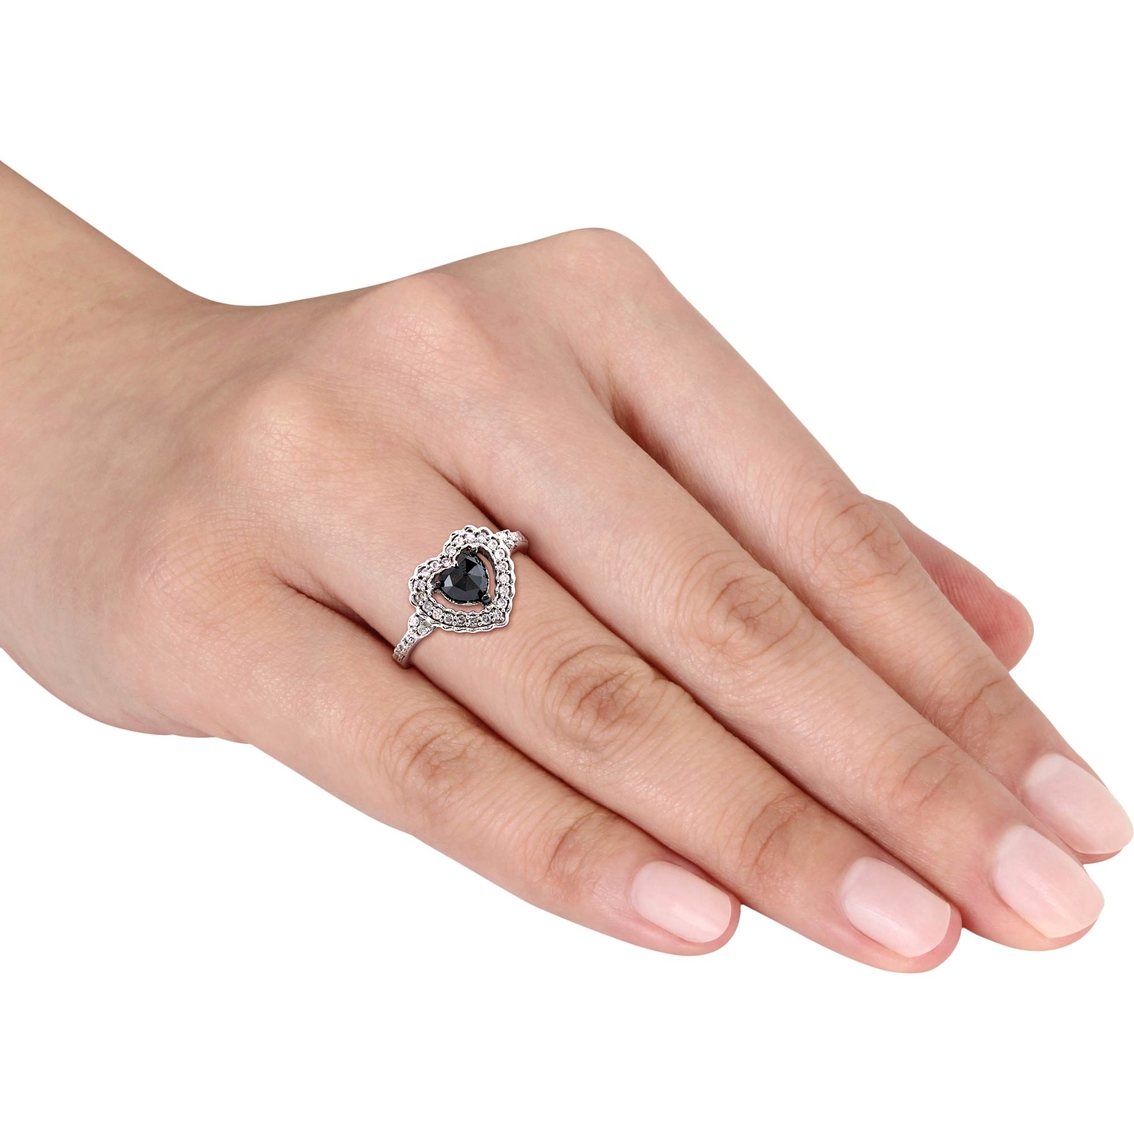 Diamore 1 CTW Black and White Diamond Halo Heart Ring in 10k White Gold - Image 3 of 3